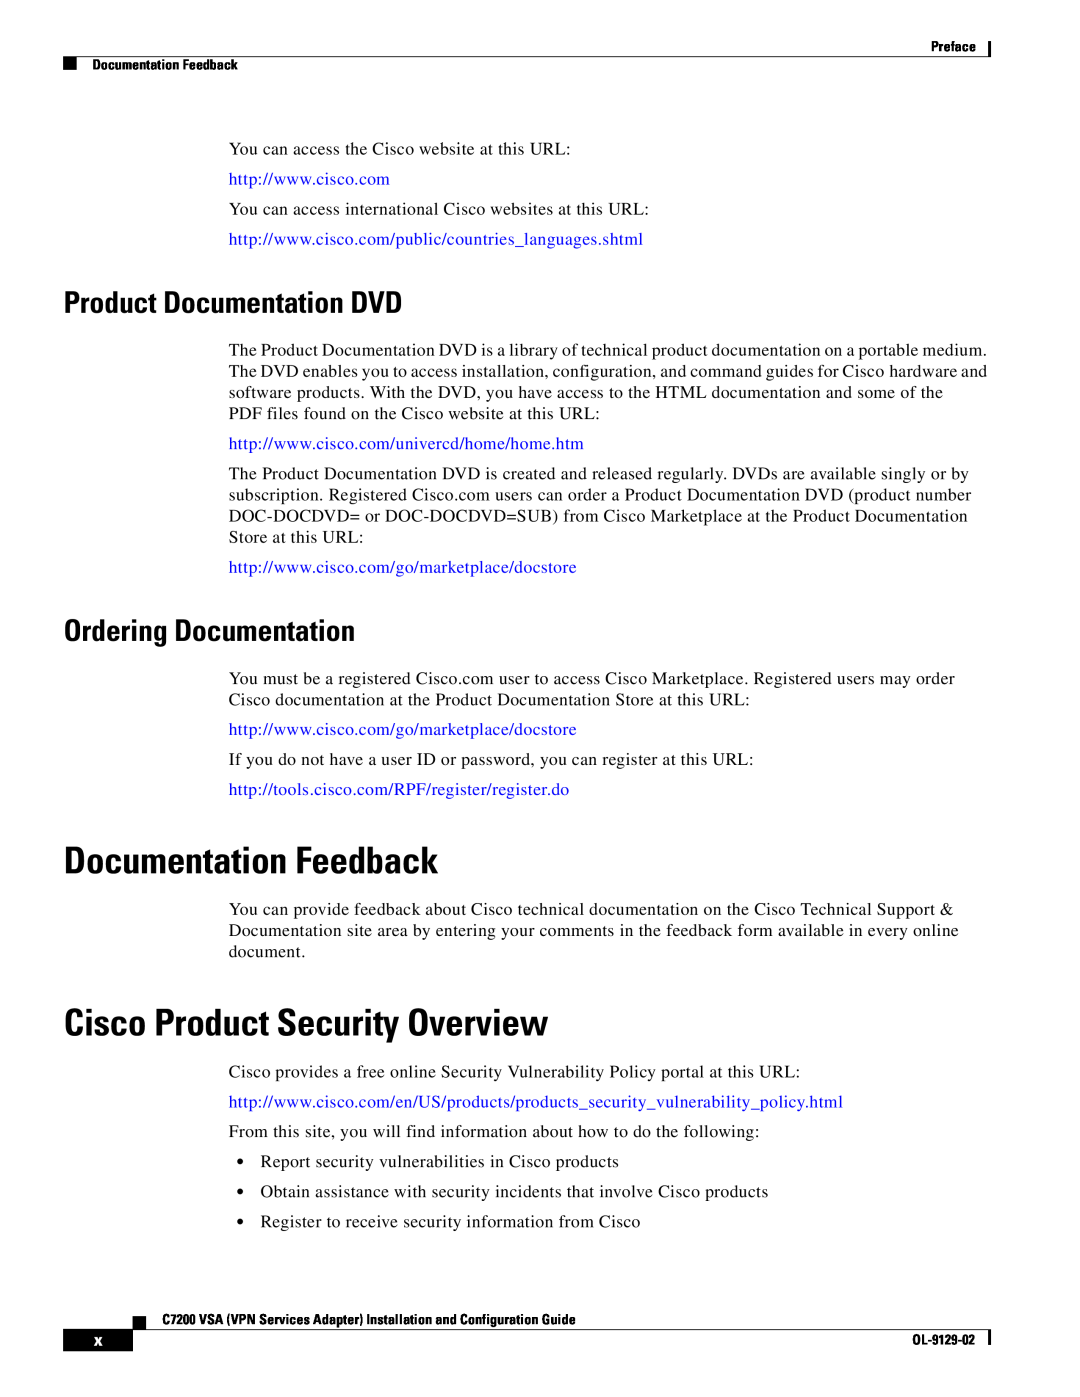 Cisco Systems C7200 manual Documentation Feedback, Cisco Product Security Overview, Product Documentation DVD 